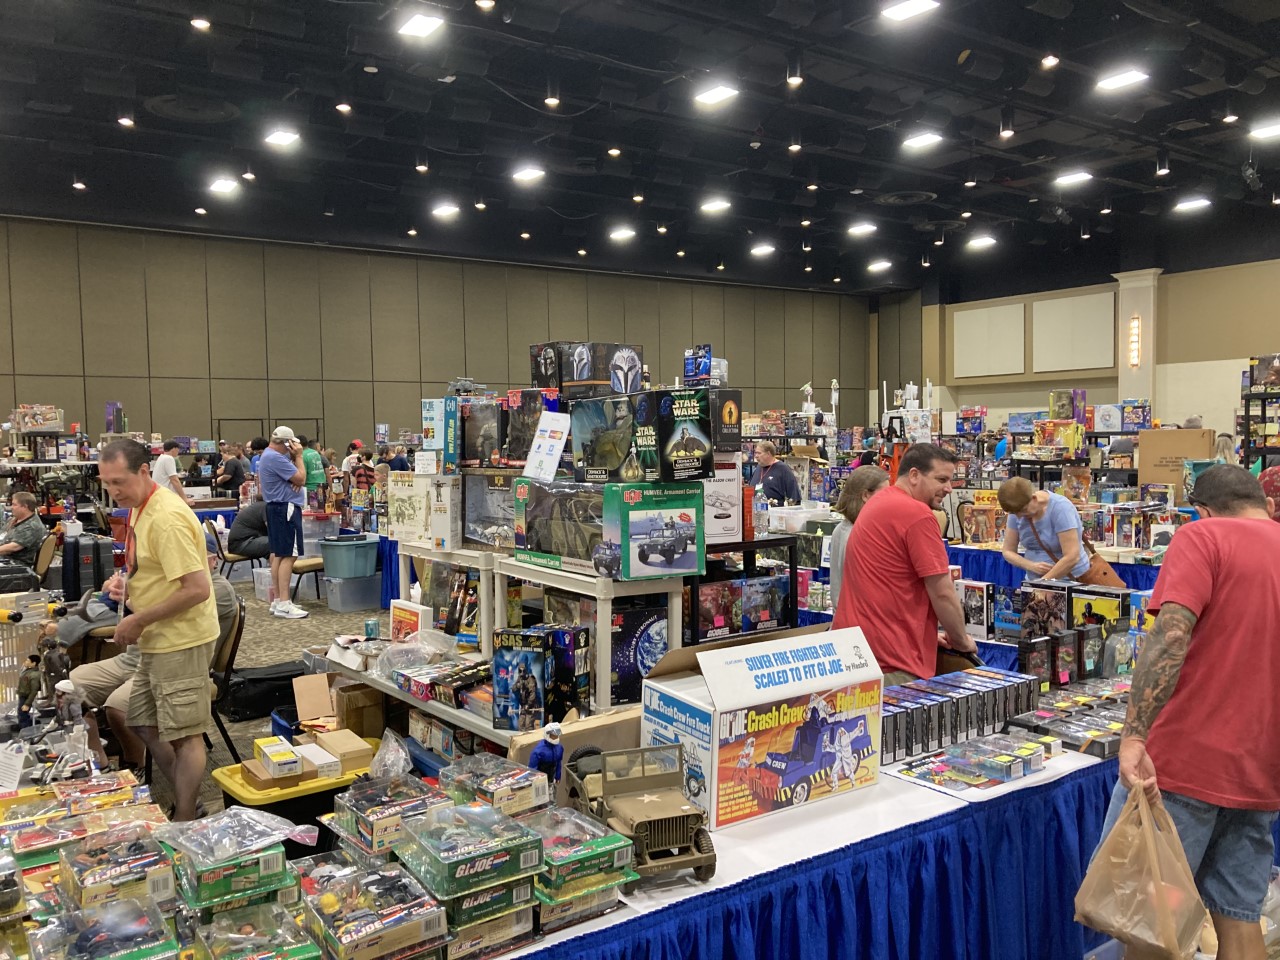 Veteran Bill Beck and the Hershey Toy Show